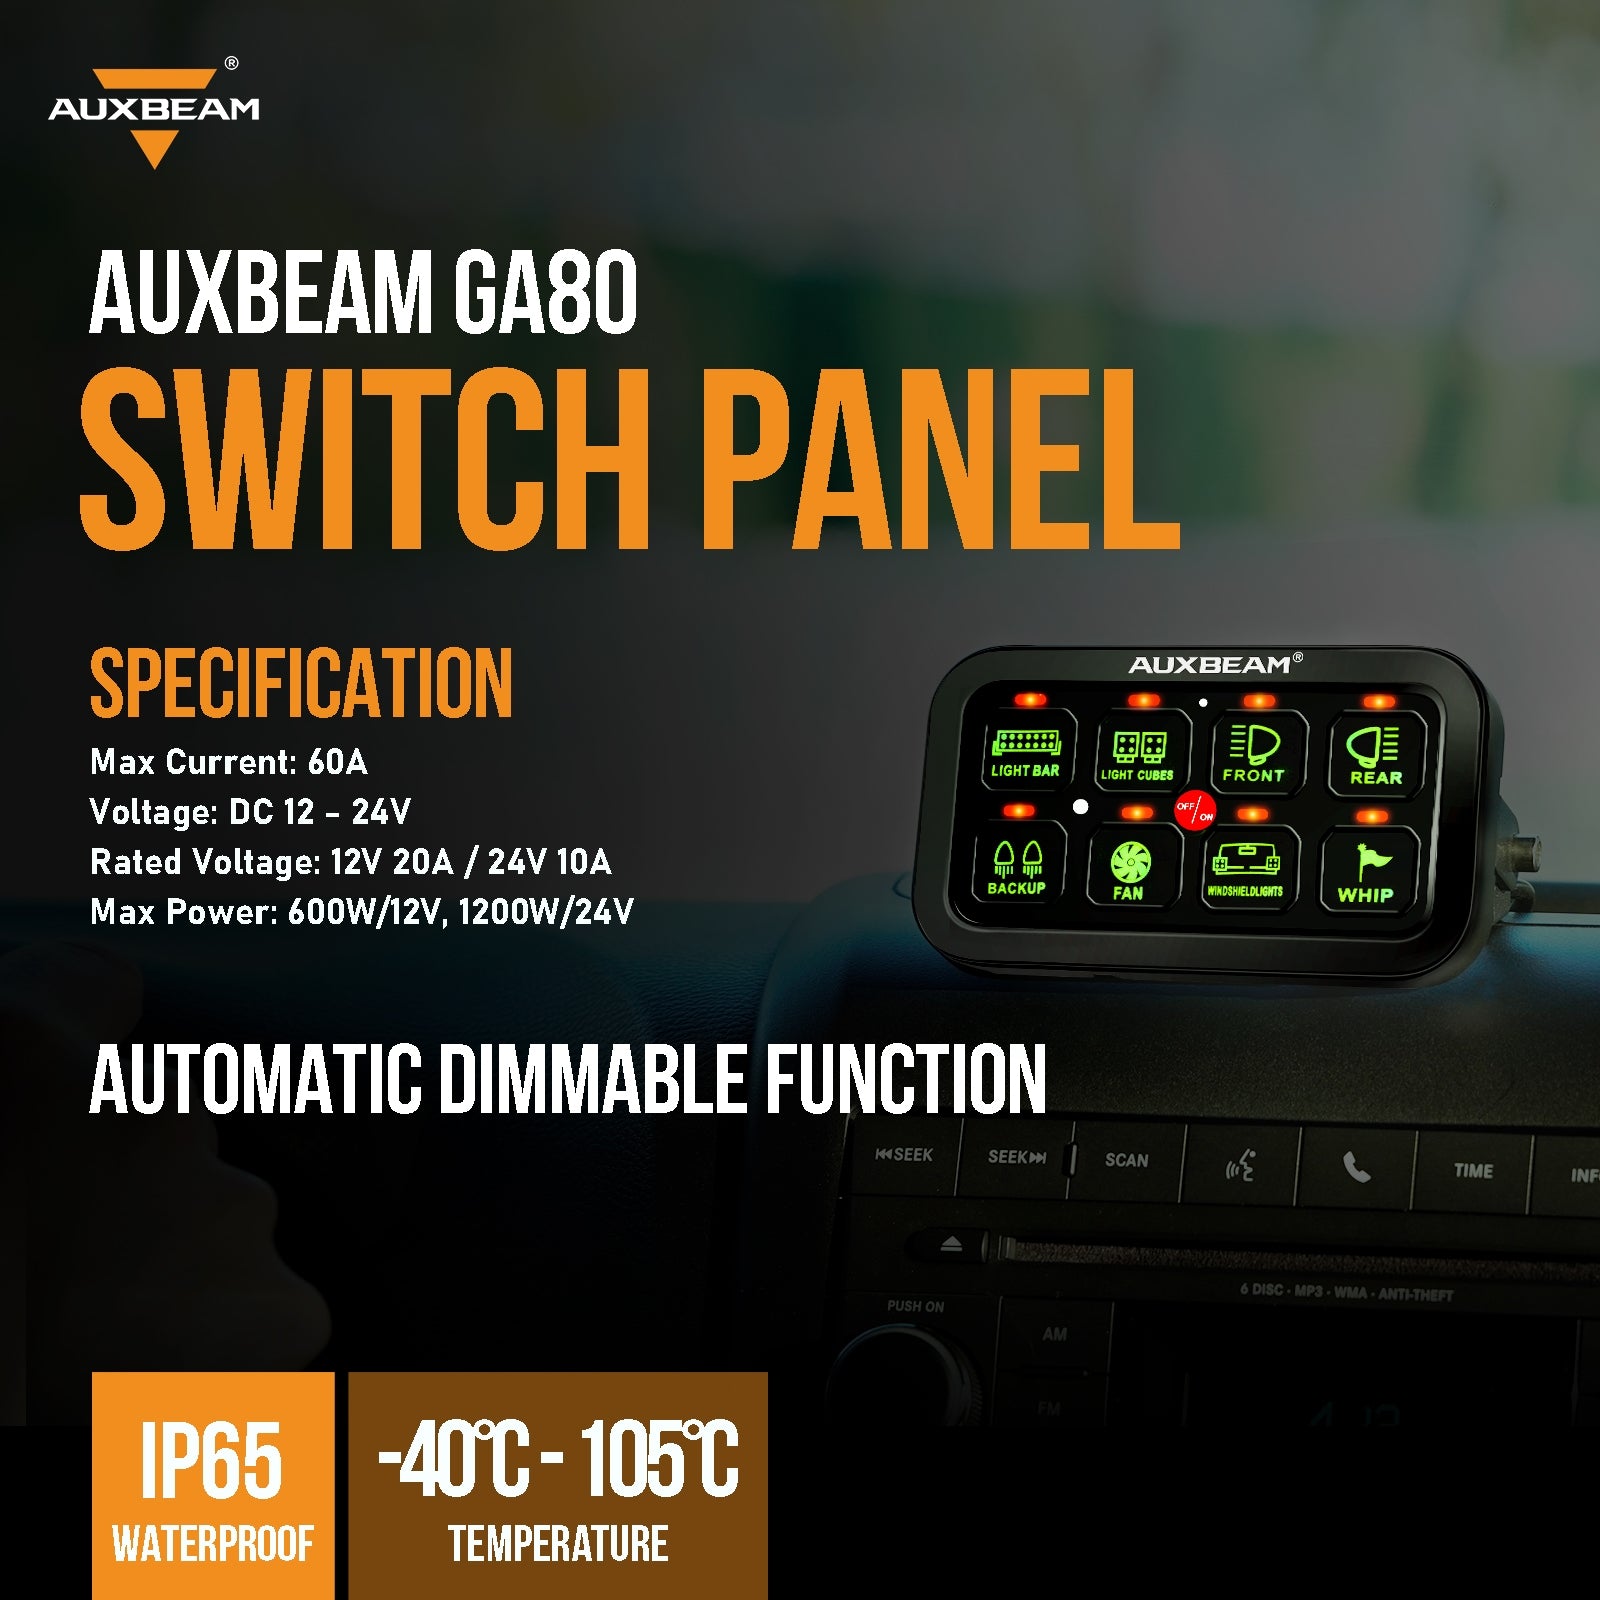 Auxbeam Gang Switch Panel GB80, Universal Circuit Control Relay System Box with Automatic Dimmable On-Off LED Switch Pod Touch Switch Box for Car Pi - 3